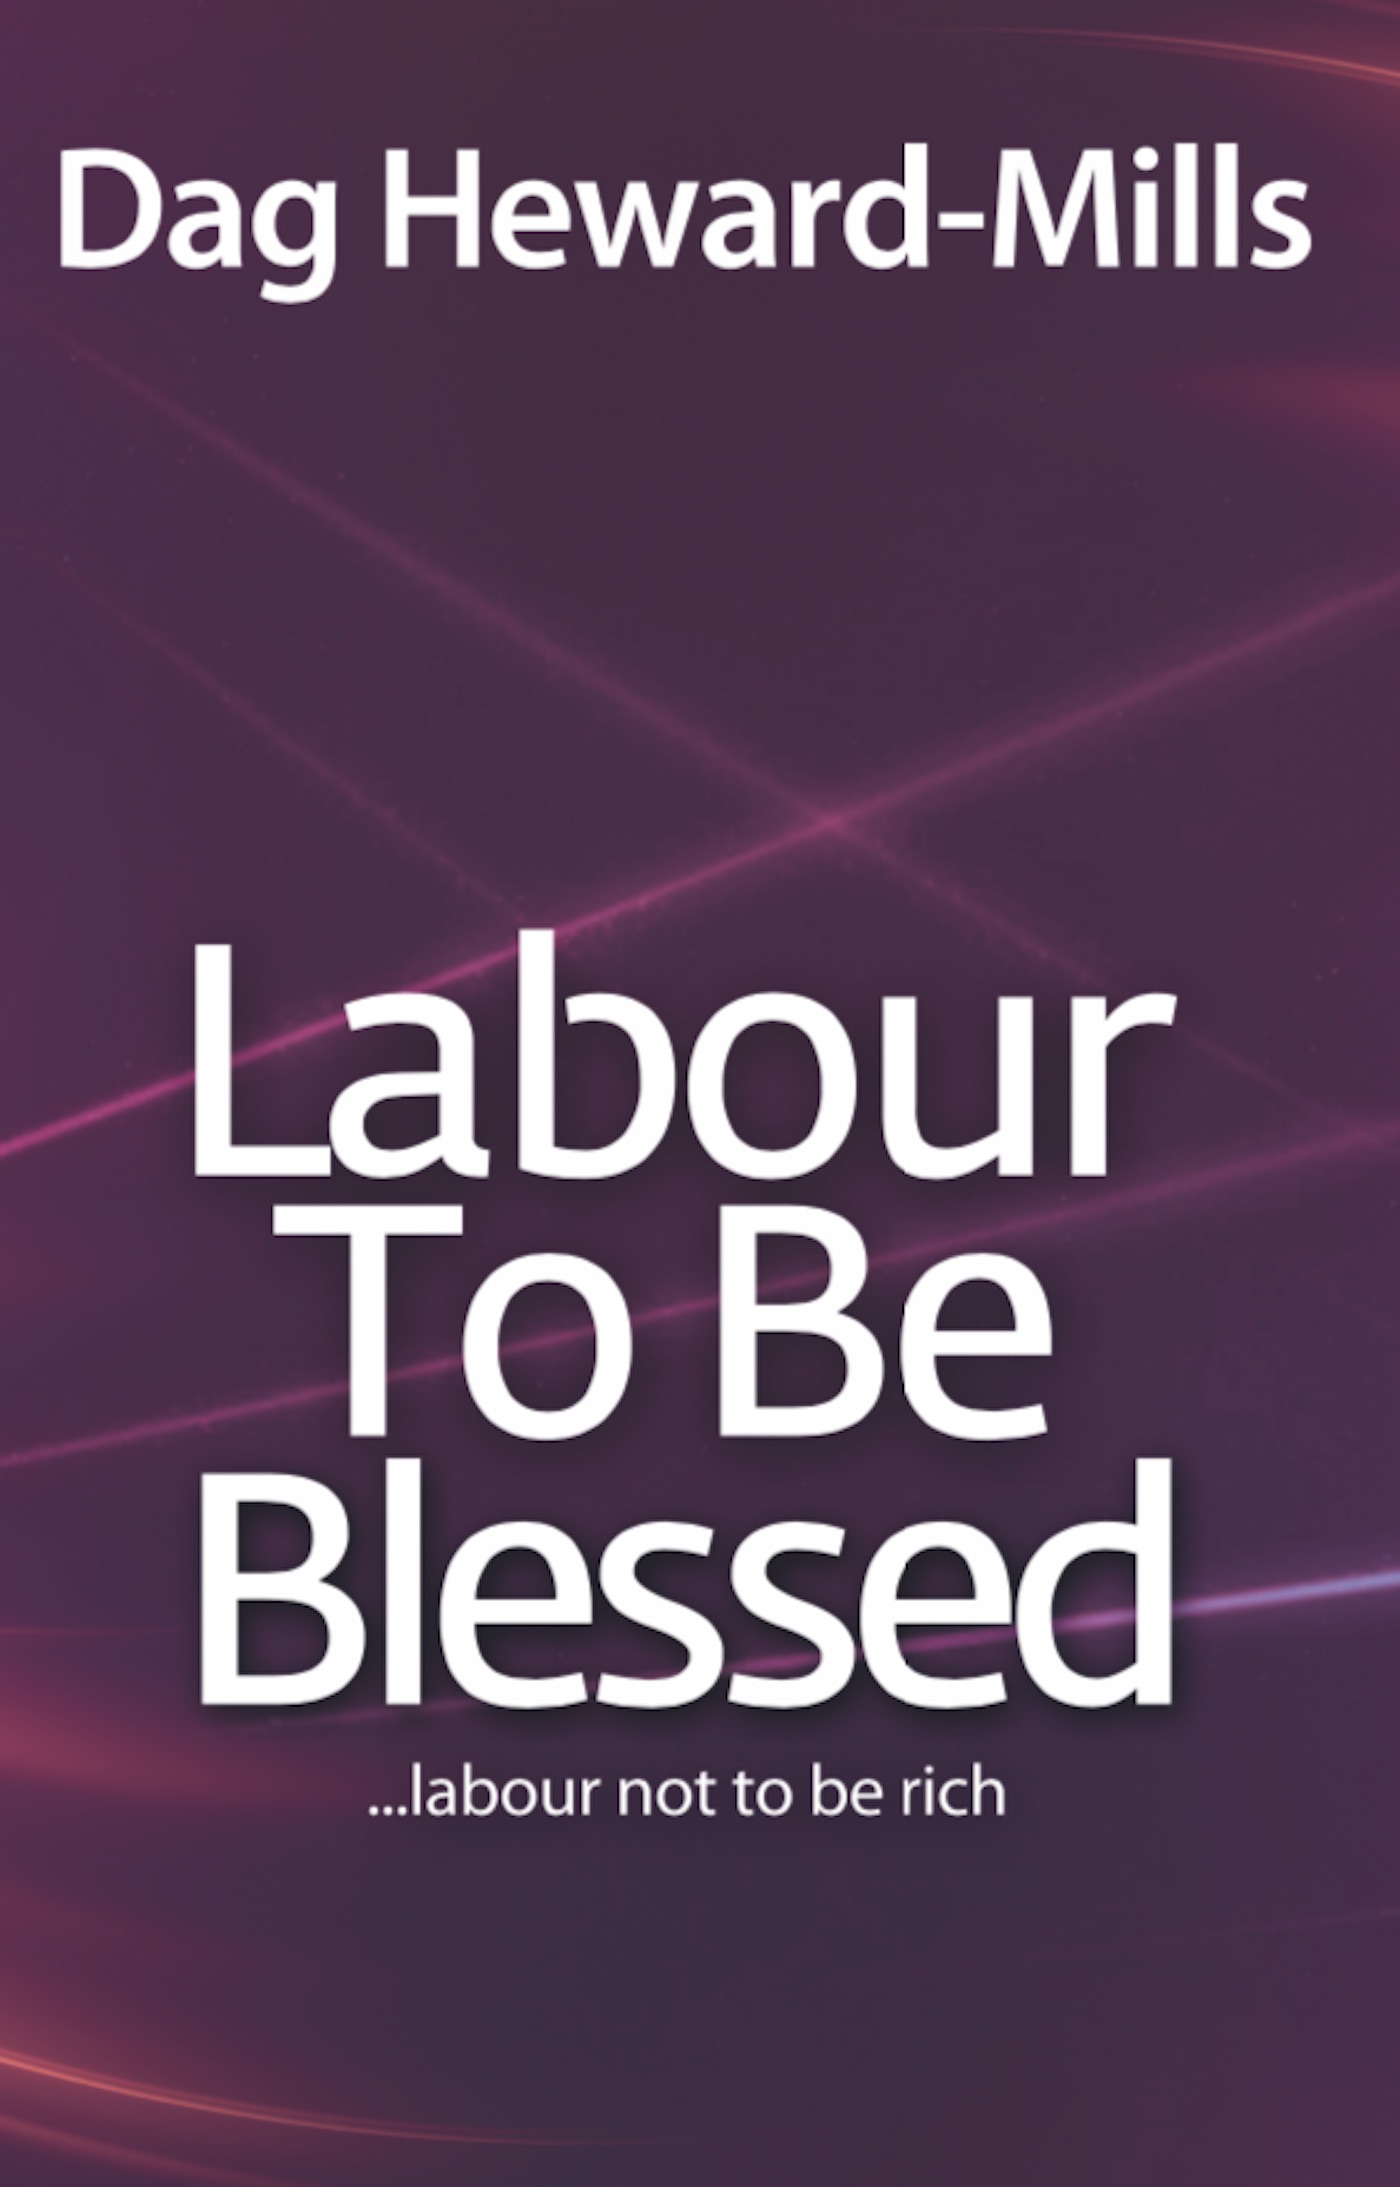 Labour to be Blessed- Labour not to be rich by Dag Heward-Mills